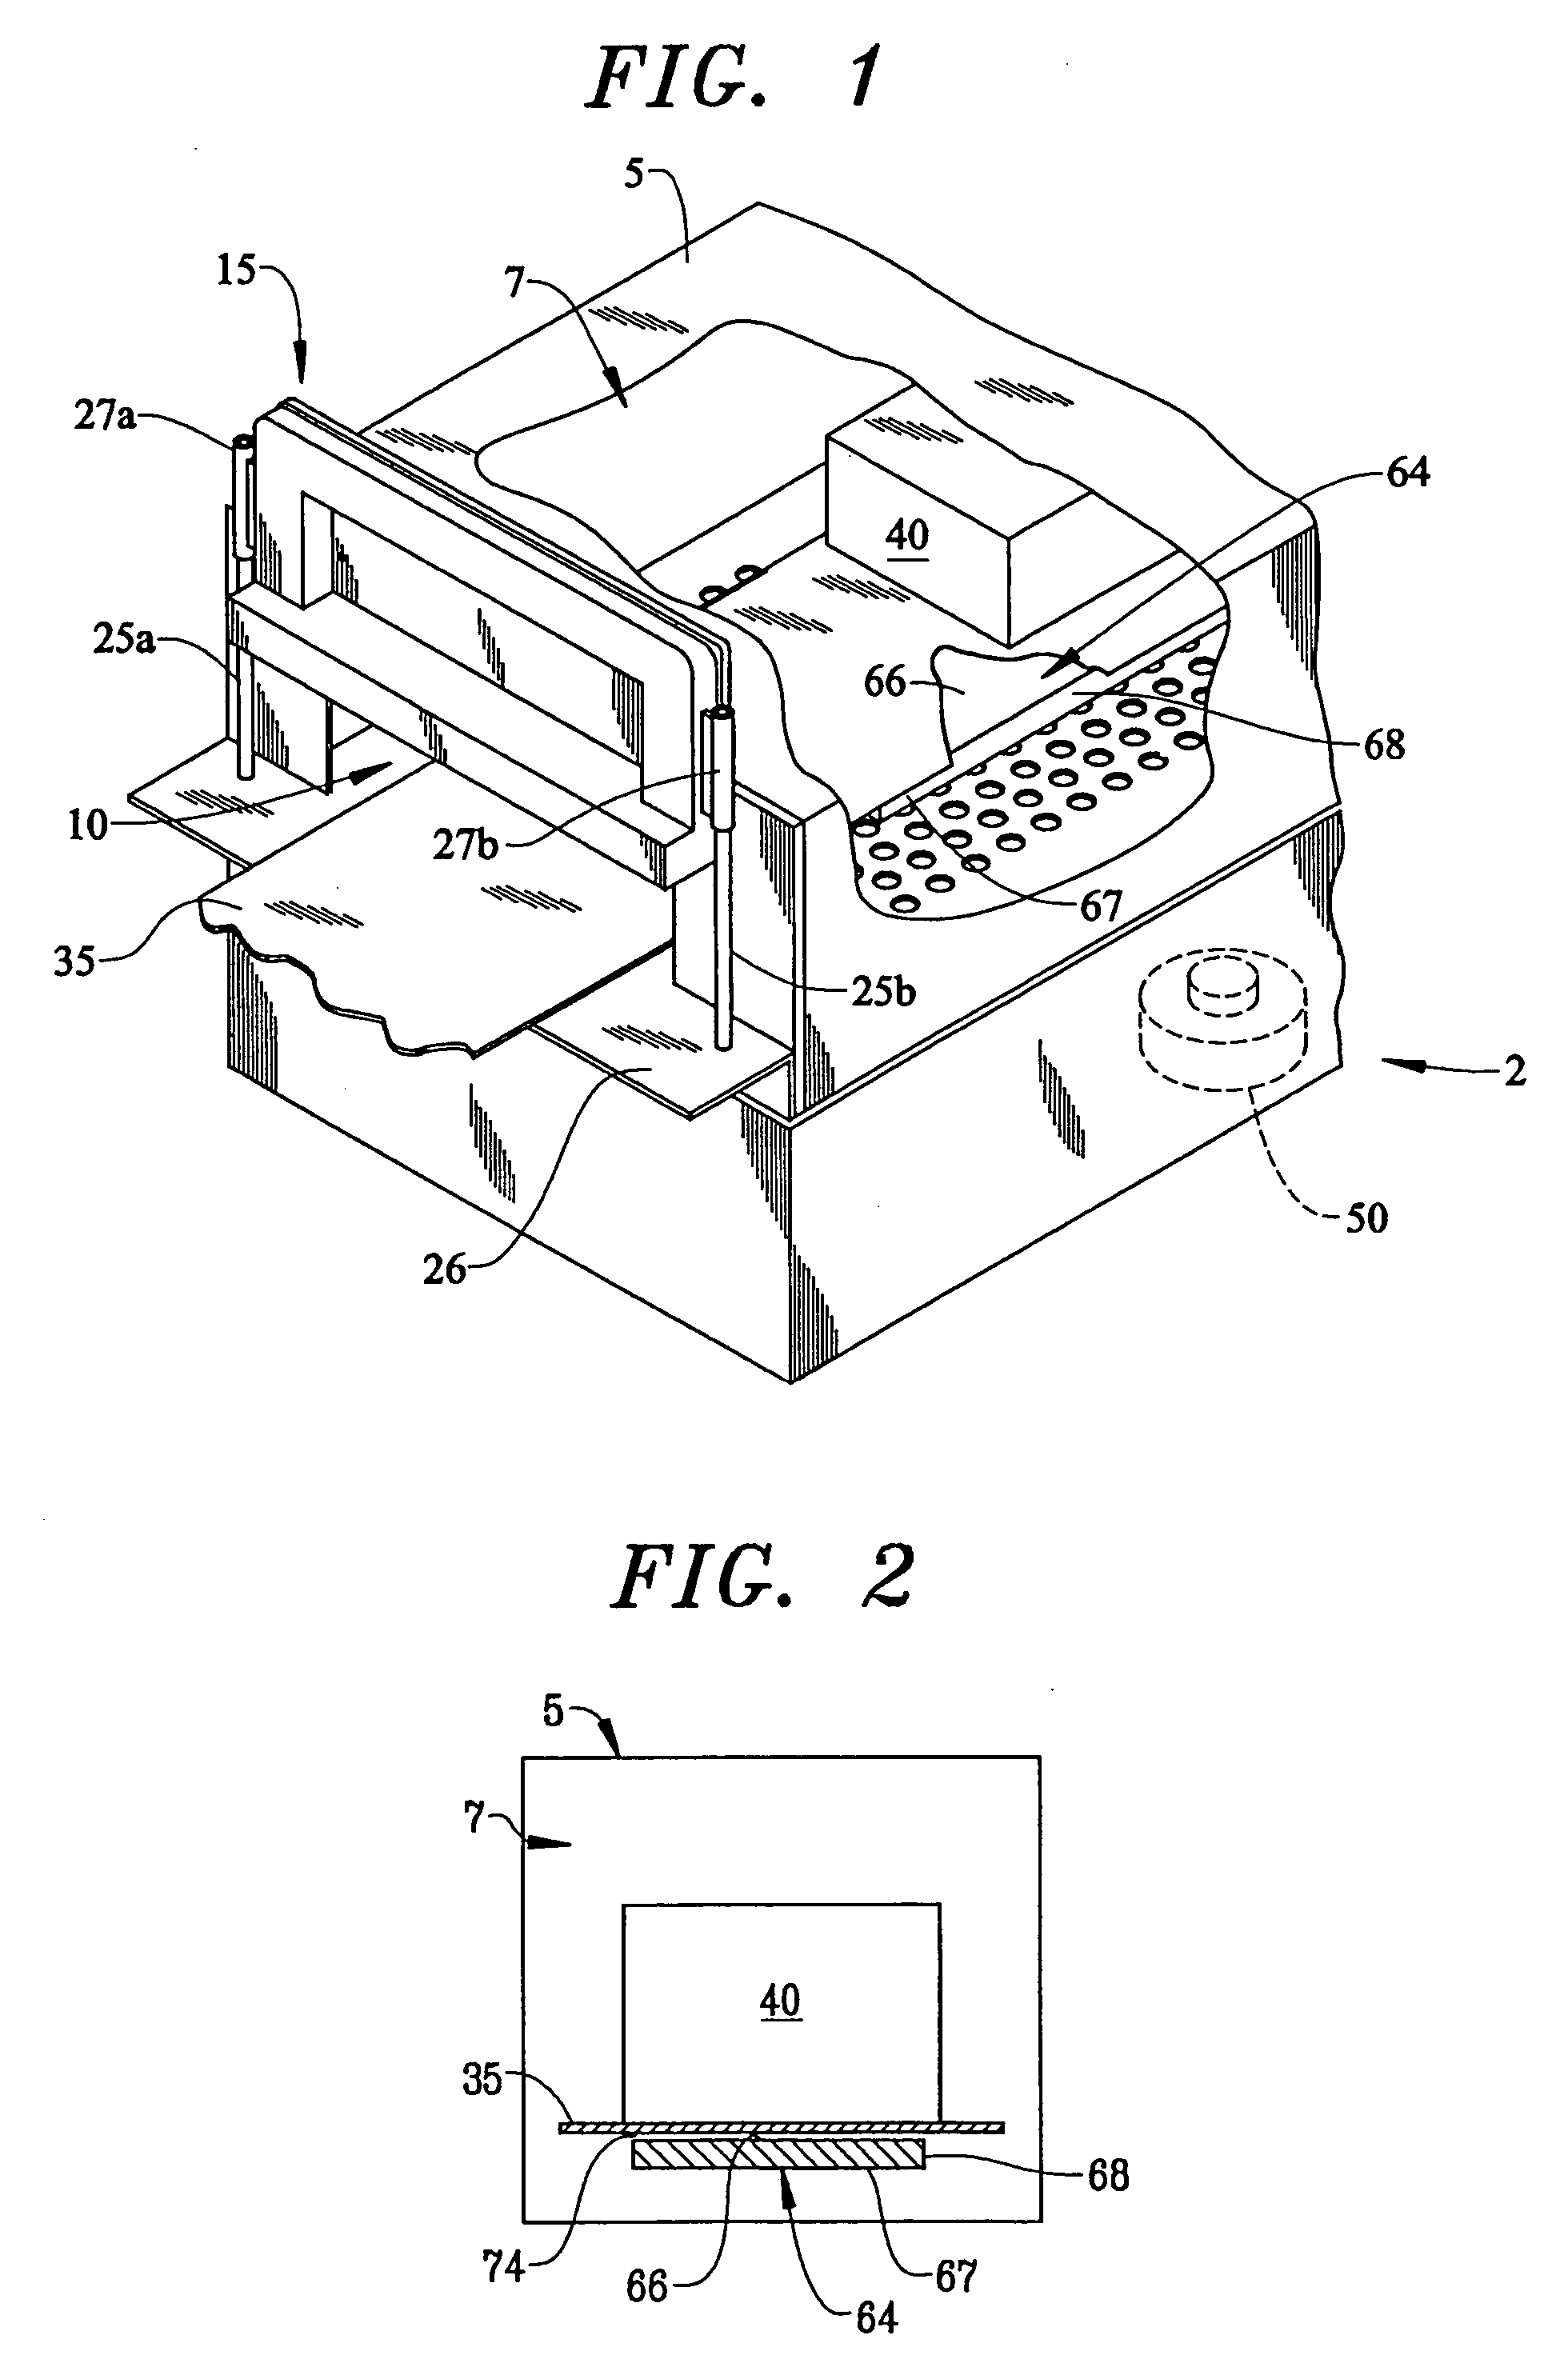 Microwave intensification system for a conveyorized microwave oven